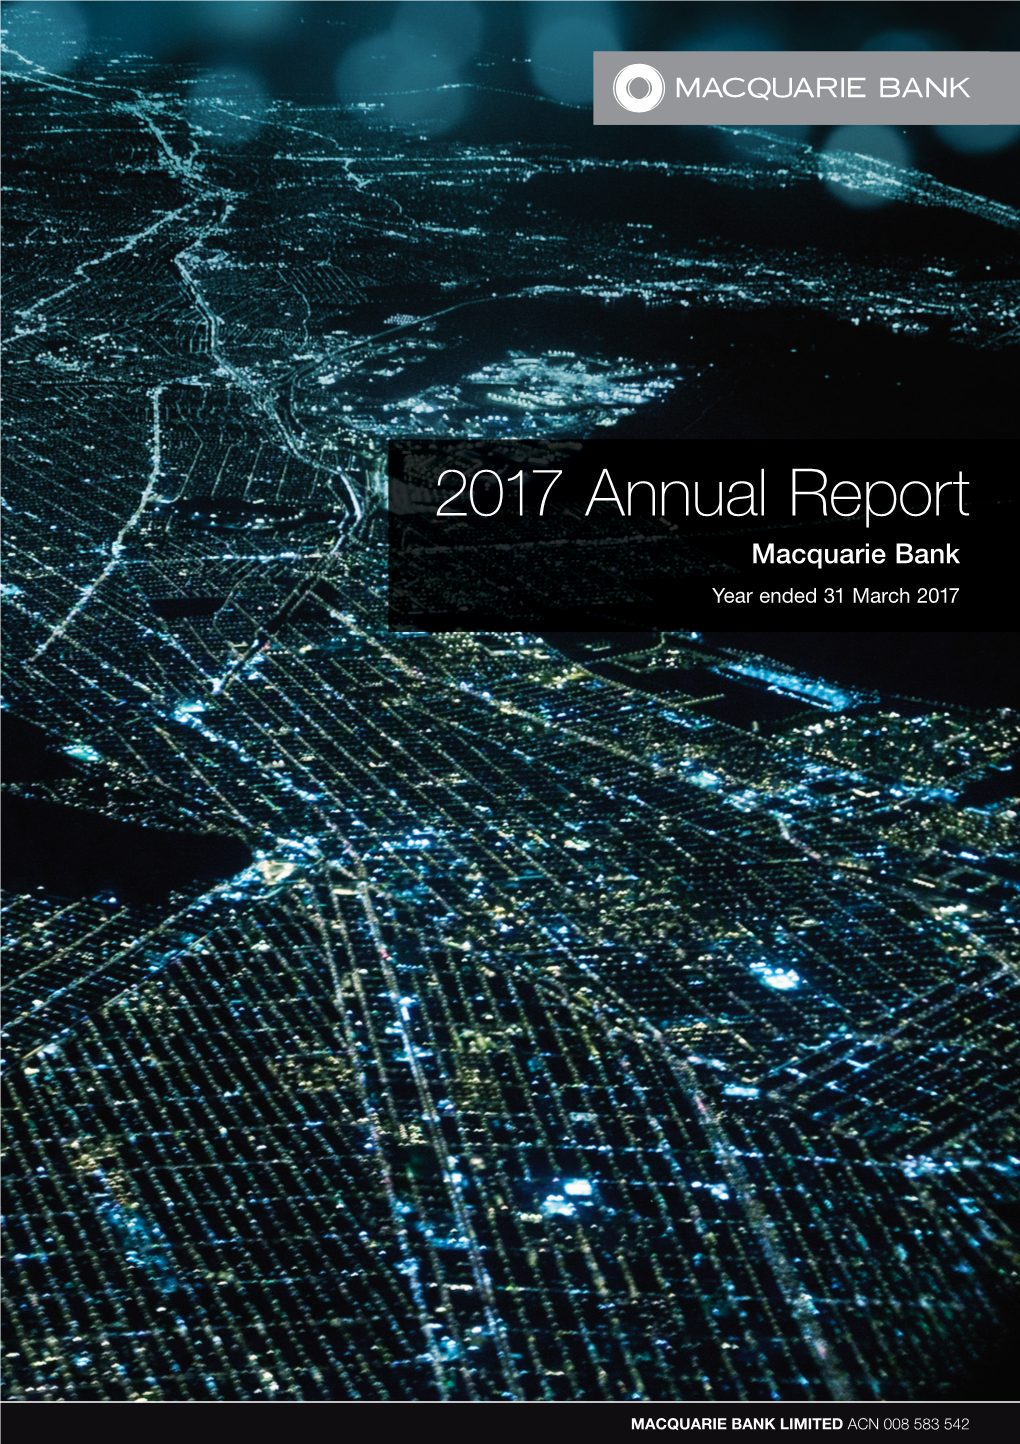 Macquarie Bank FY17 Annual Report